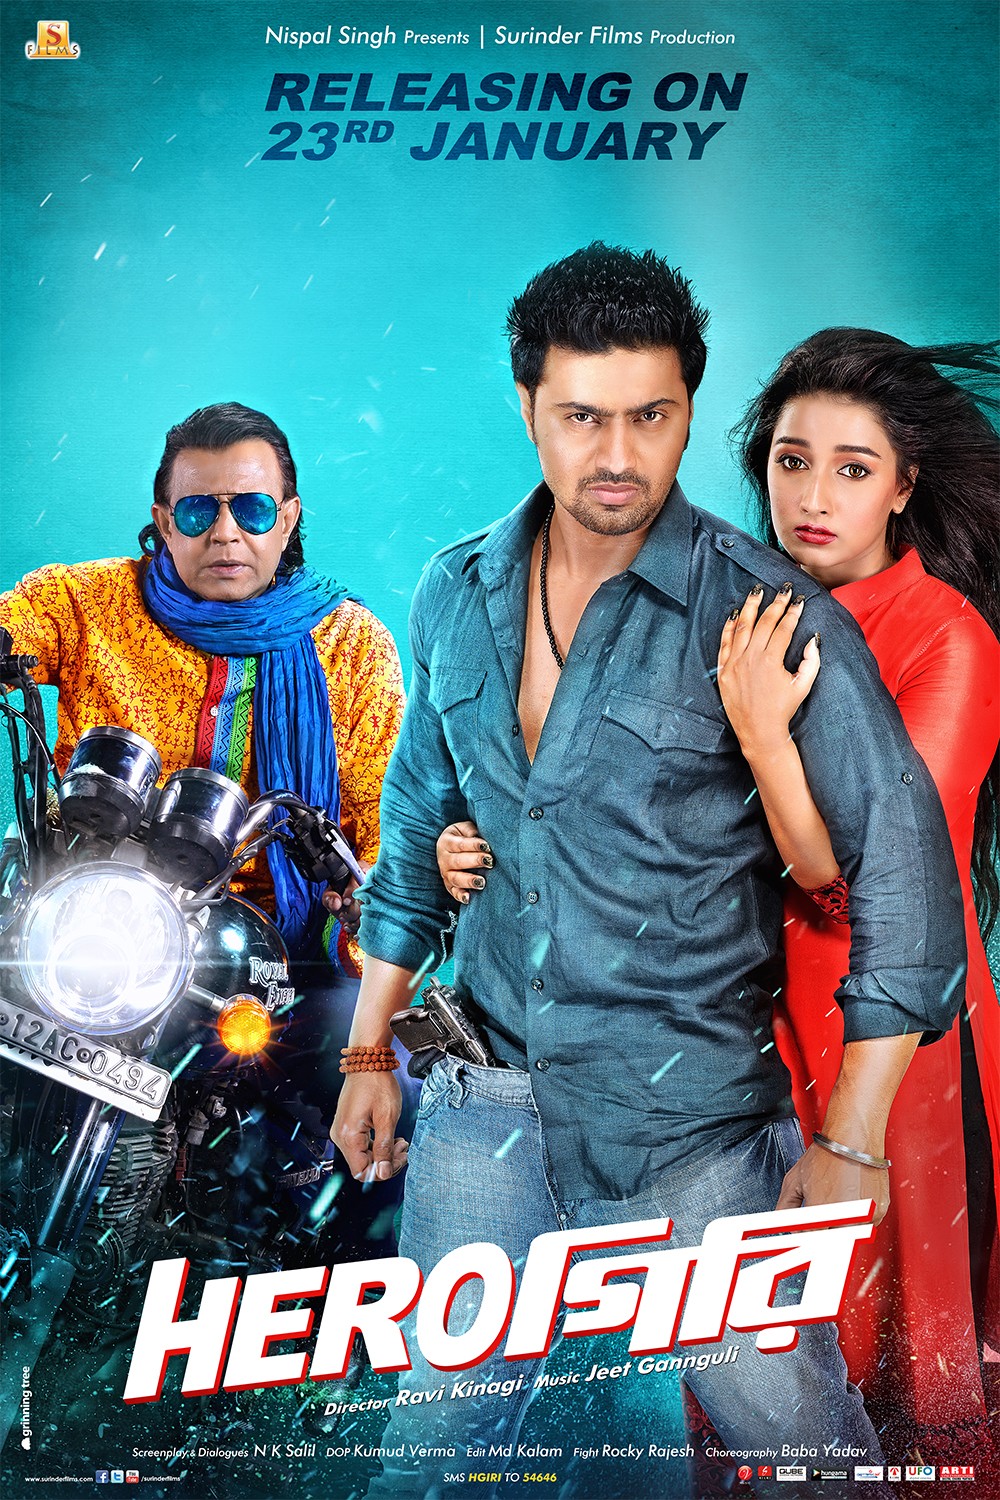 Extra Large Movie Poster Image for Herogiri (#4 of 8)